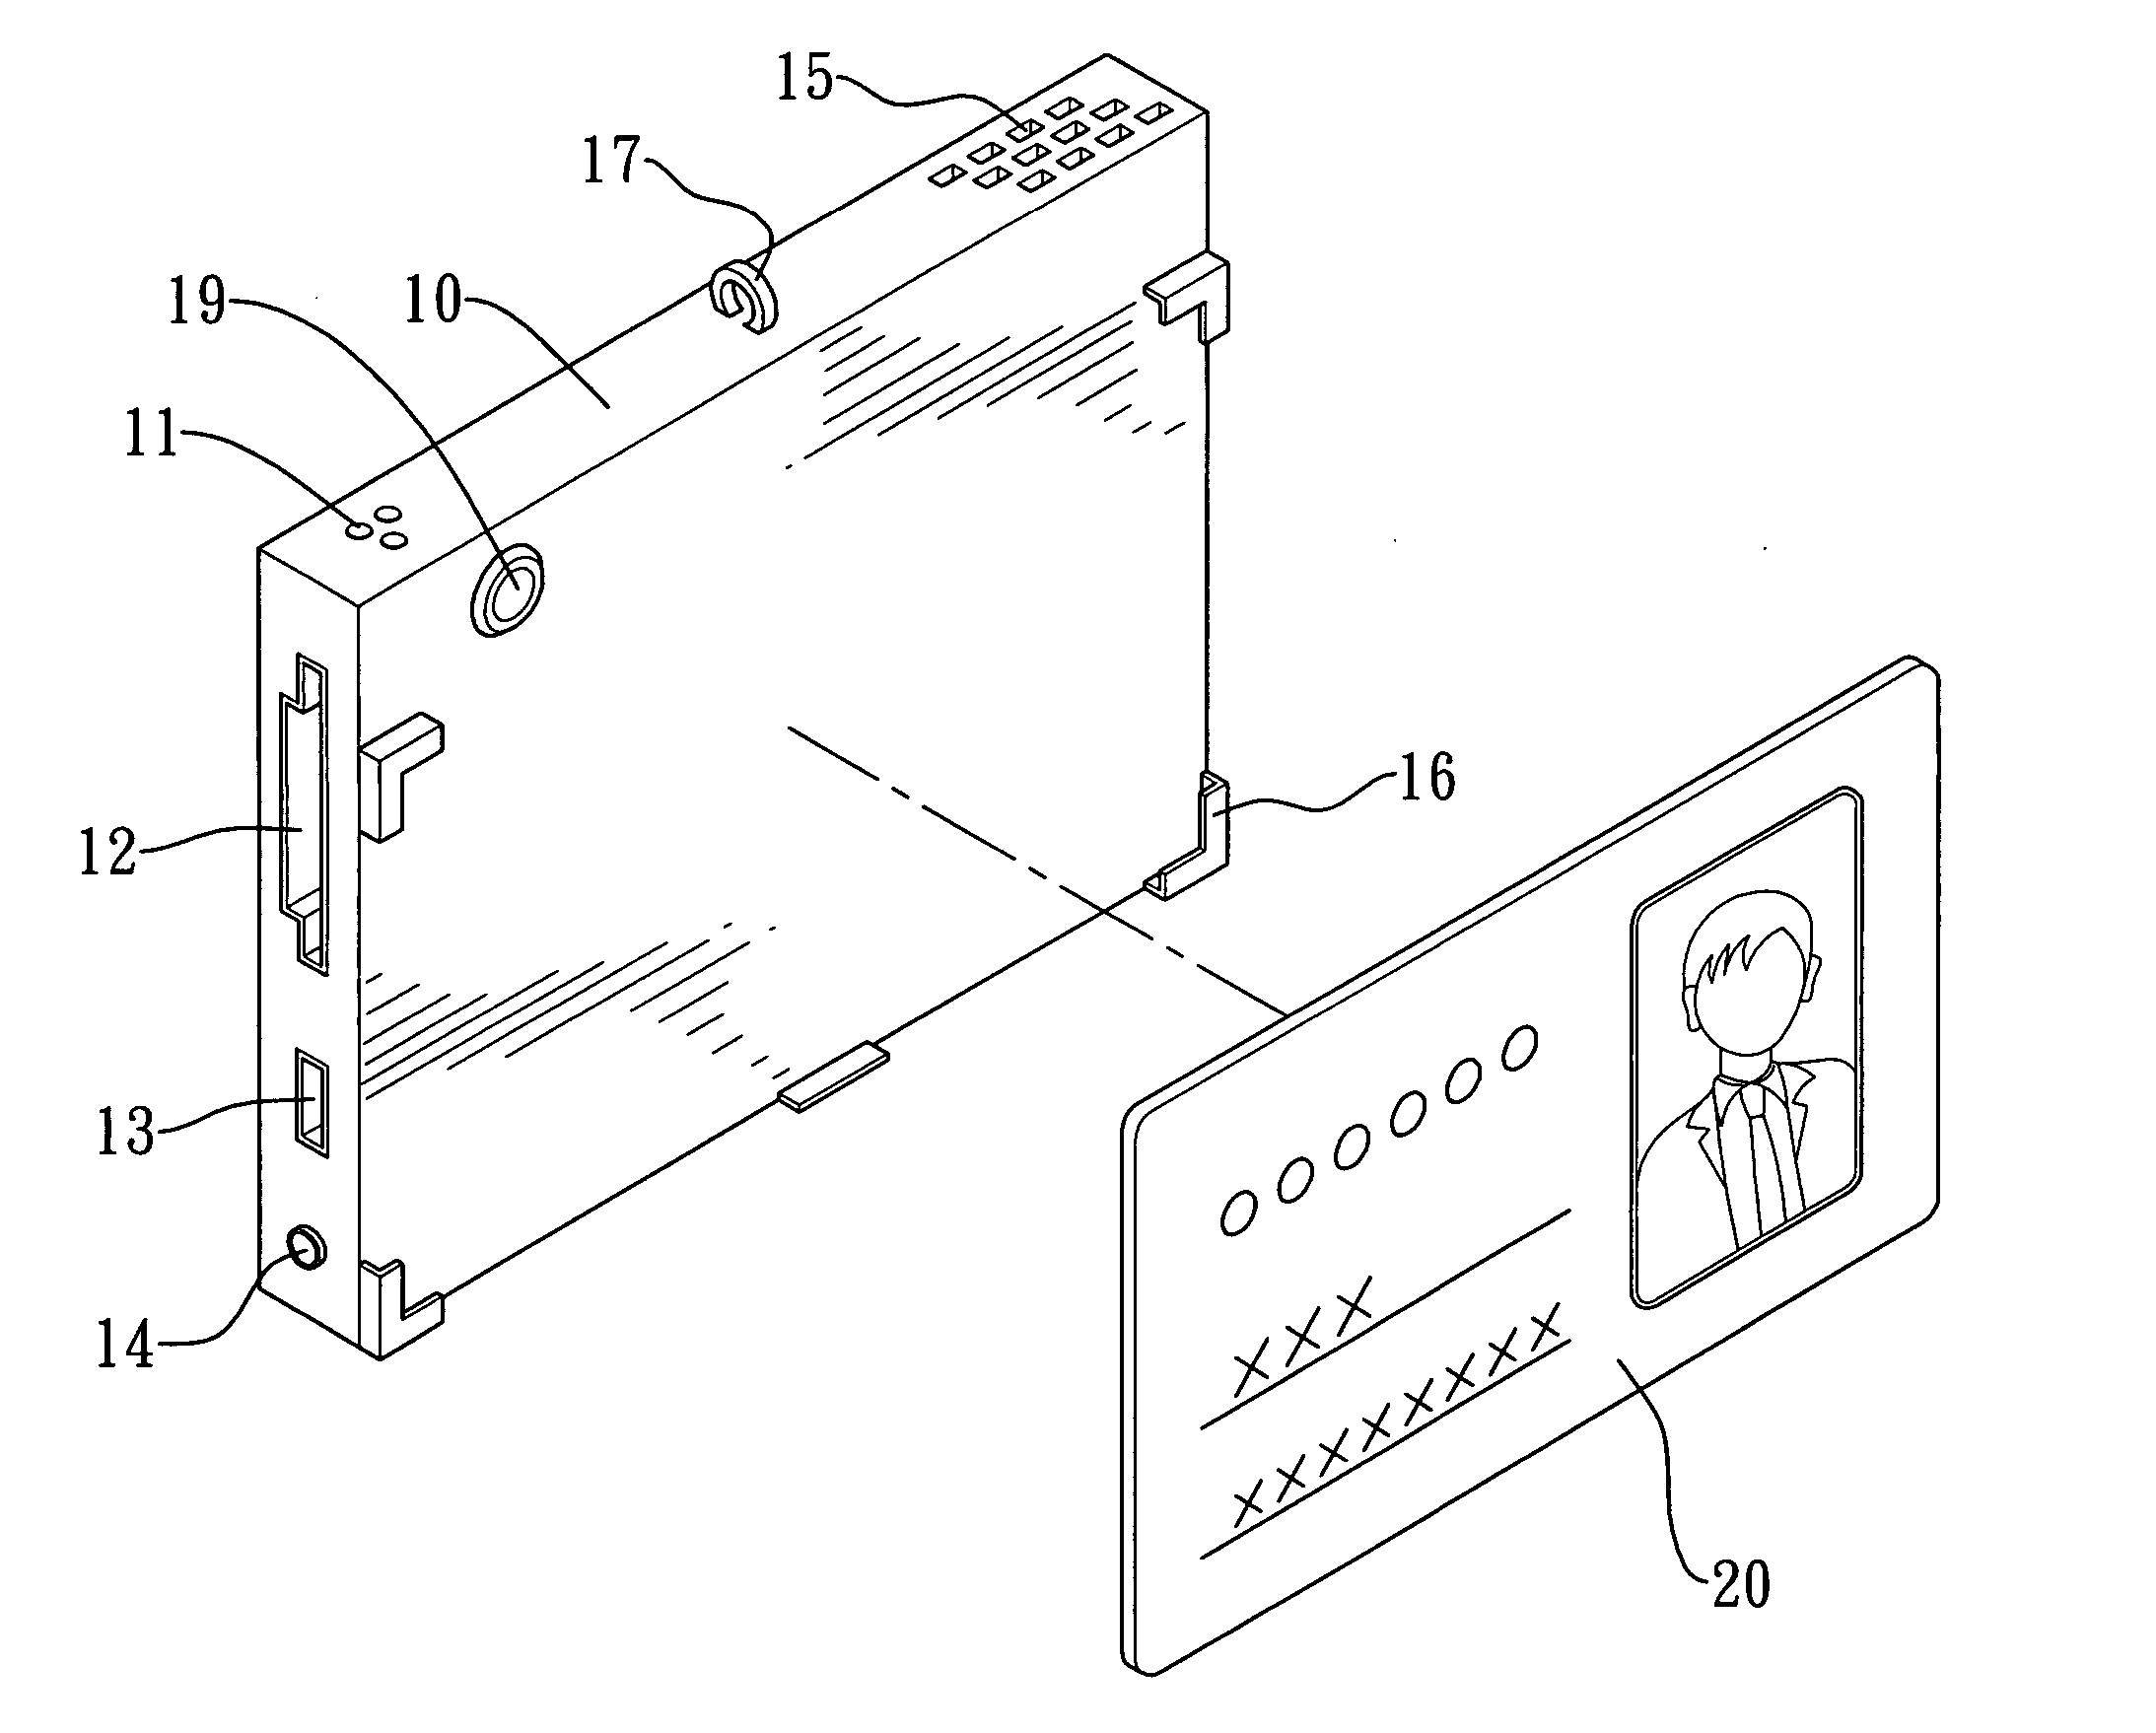 Display device of identification card